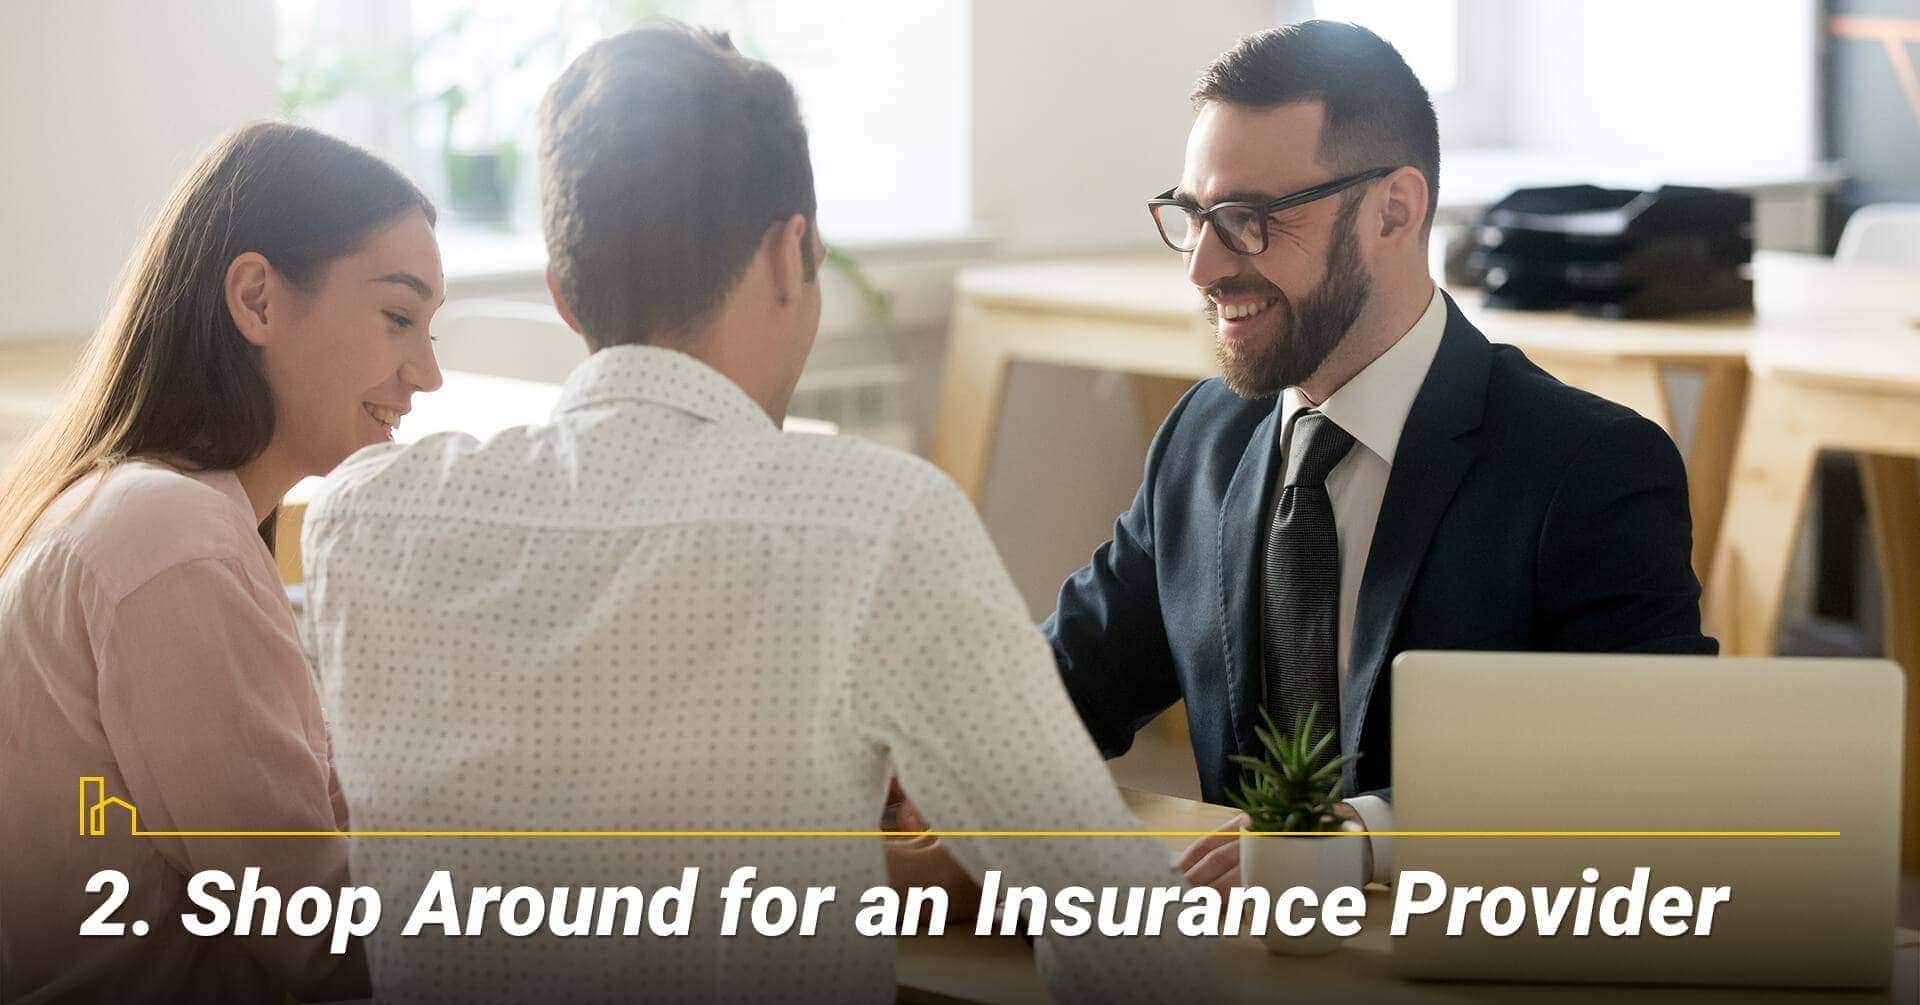 Shop Around for an Insurance Provider, looking for best insurance rate